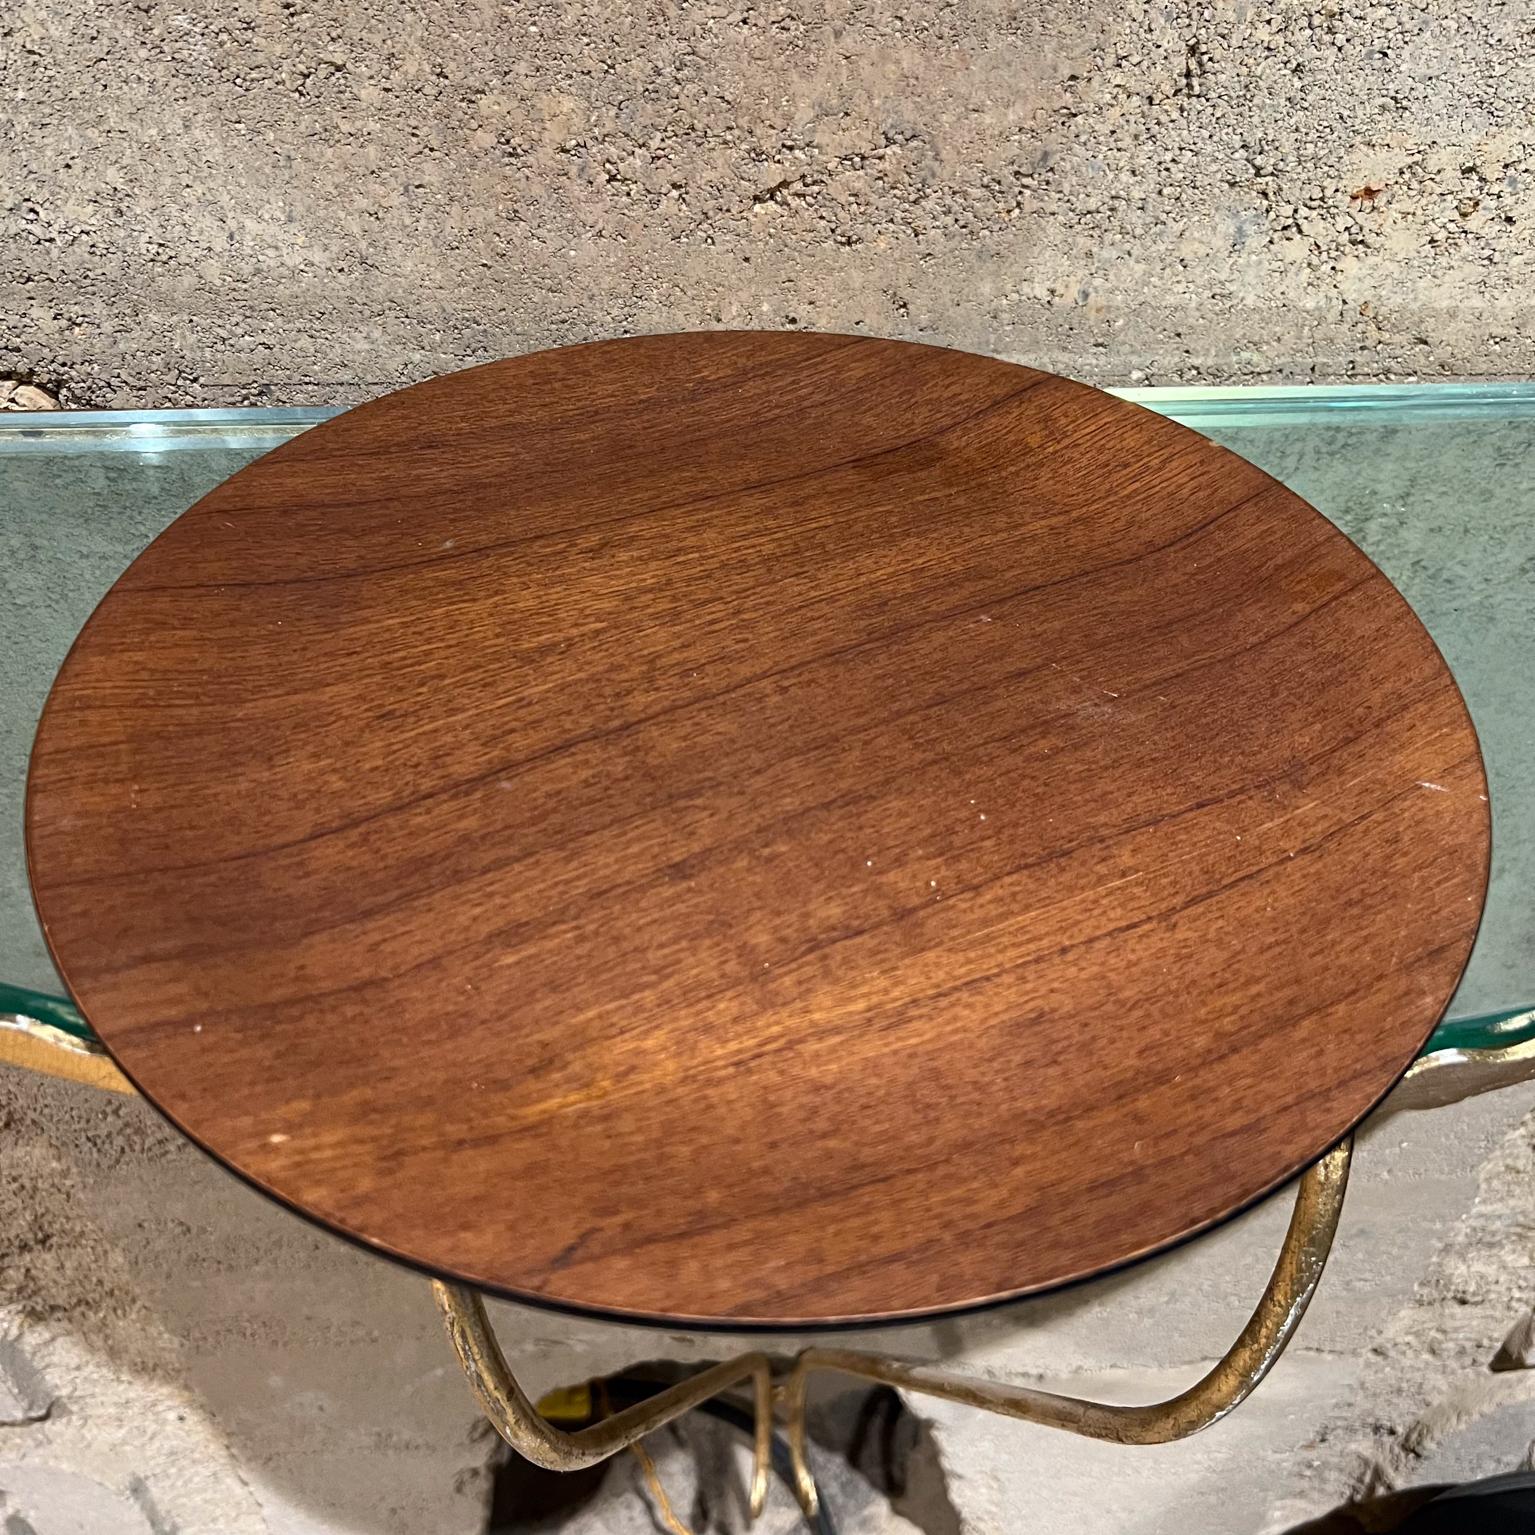 1970s Modernist Teak Wood on Black Plate
1 h x 12.13 diameter
Preowned unrestored vintage condition, not new.
Refer to all images provided.